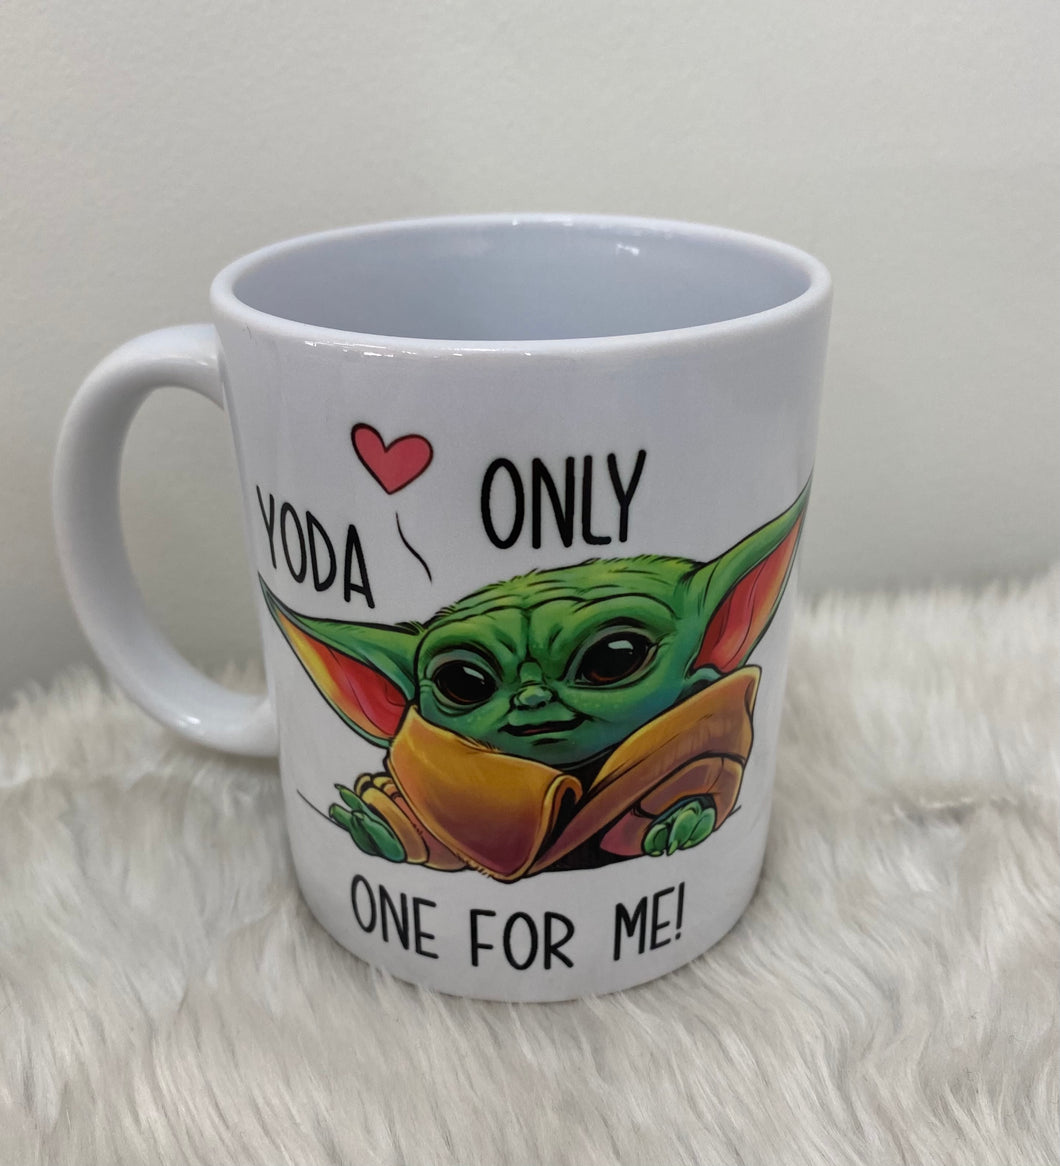 Yoda only one for me mug